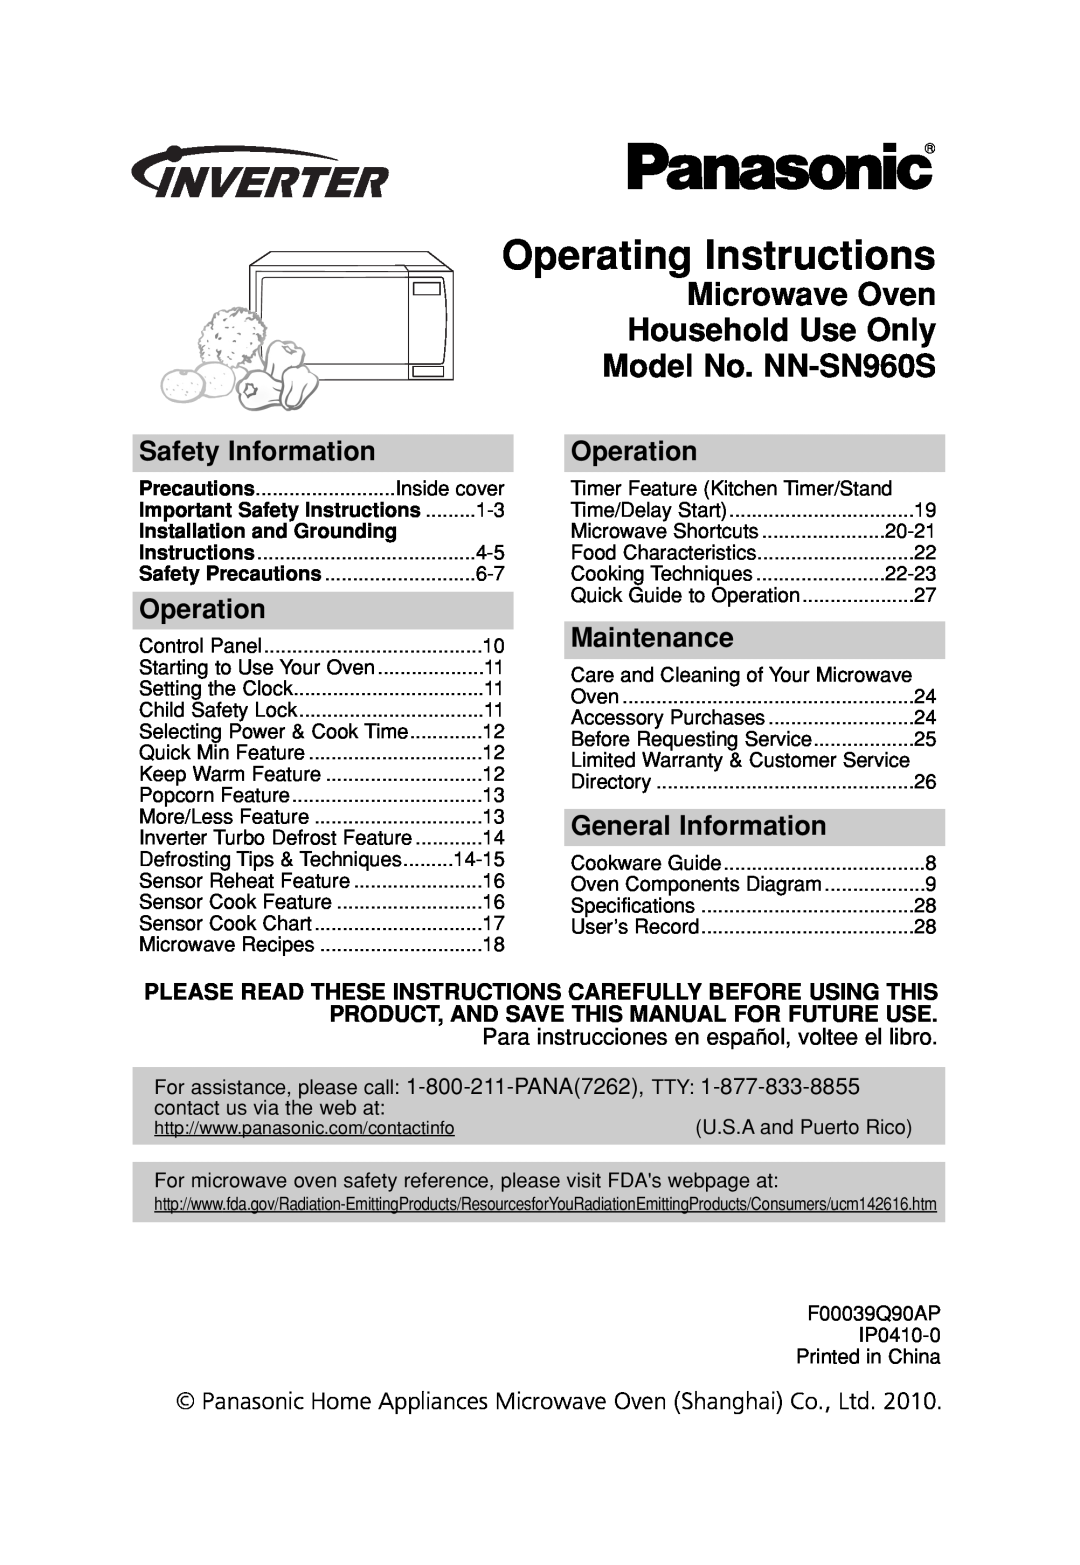 Panasonic operating instructions Operating Instructions, Microwave Oven Household Use Only, Model No. NN-SN960S 